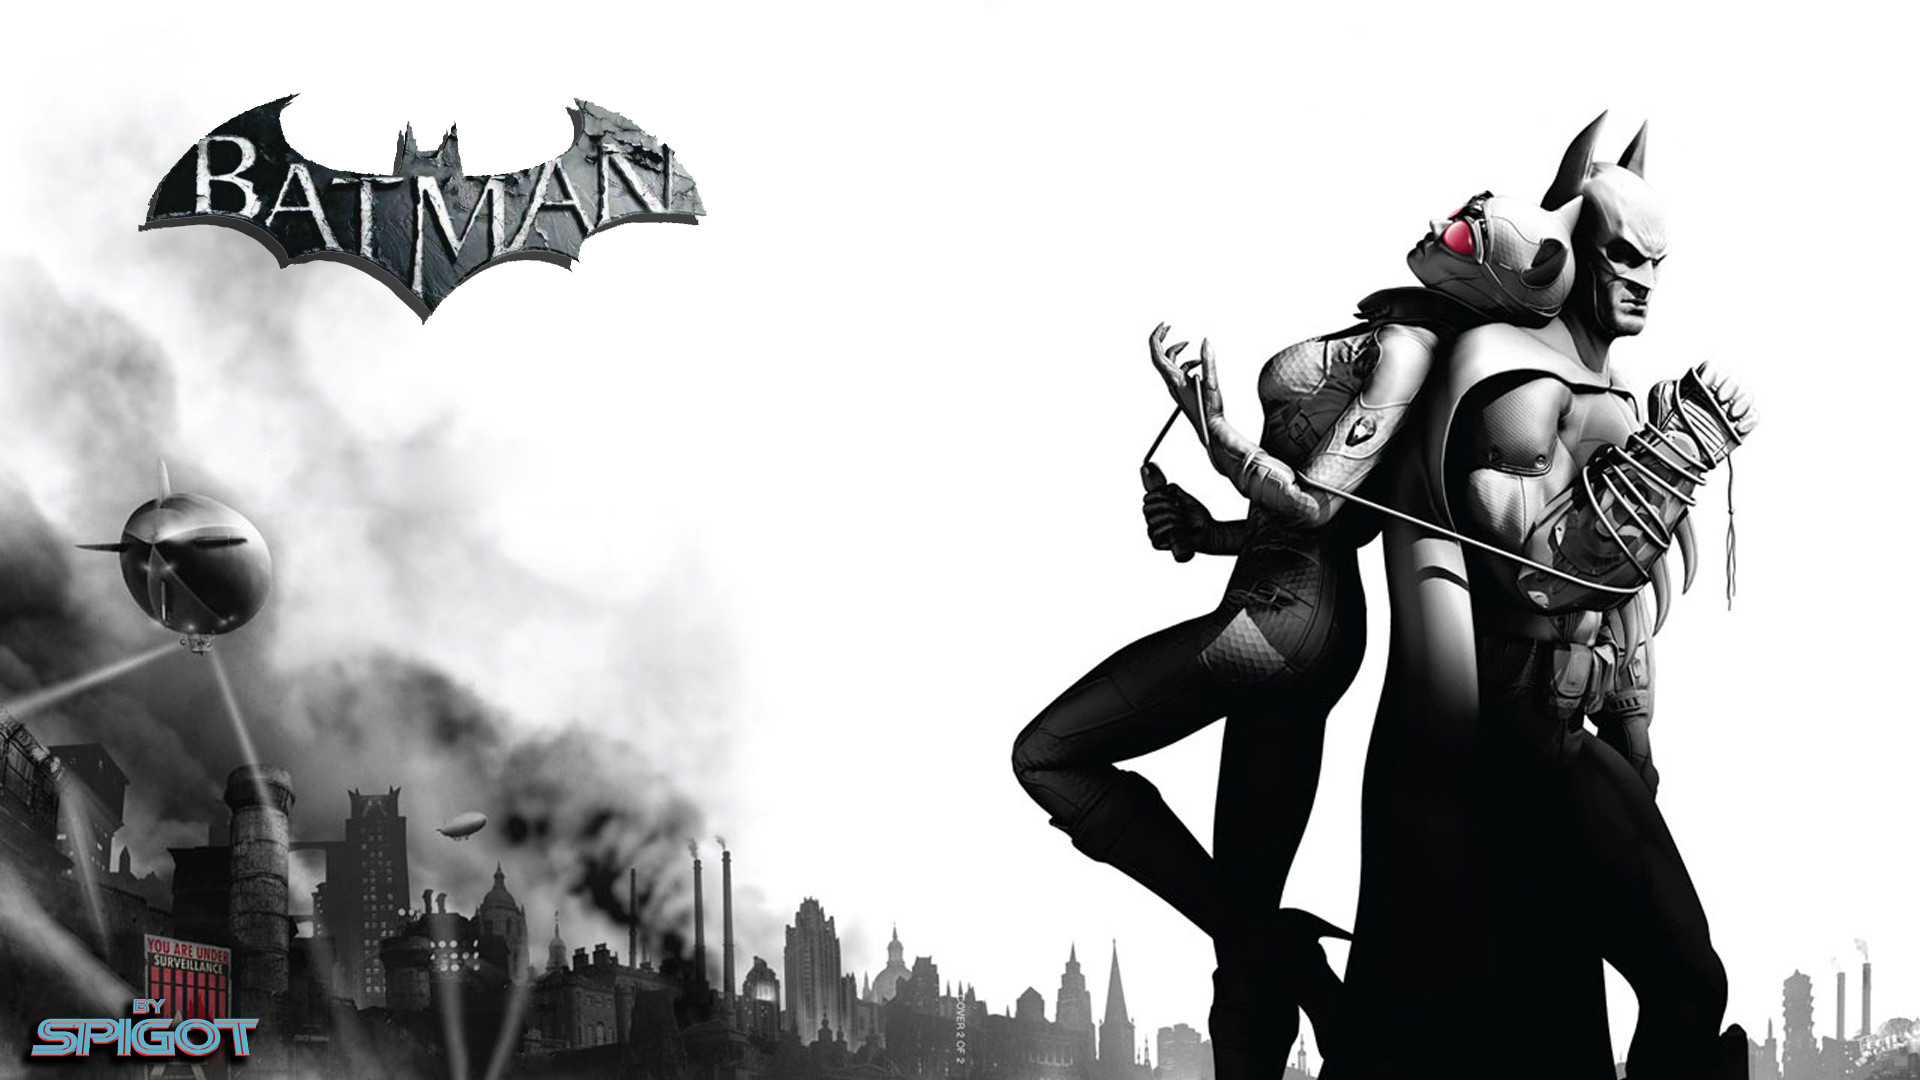 1920x1080 These Batman Arkham City wallpapers are a request from Penfold, so here you  go mate